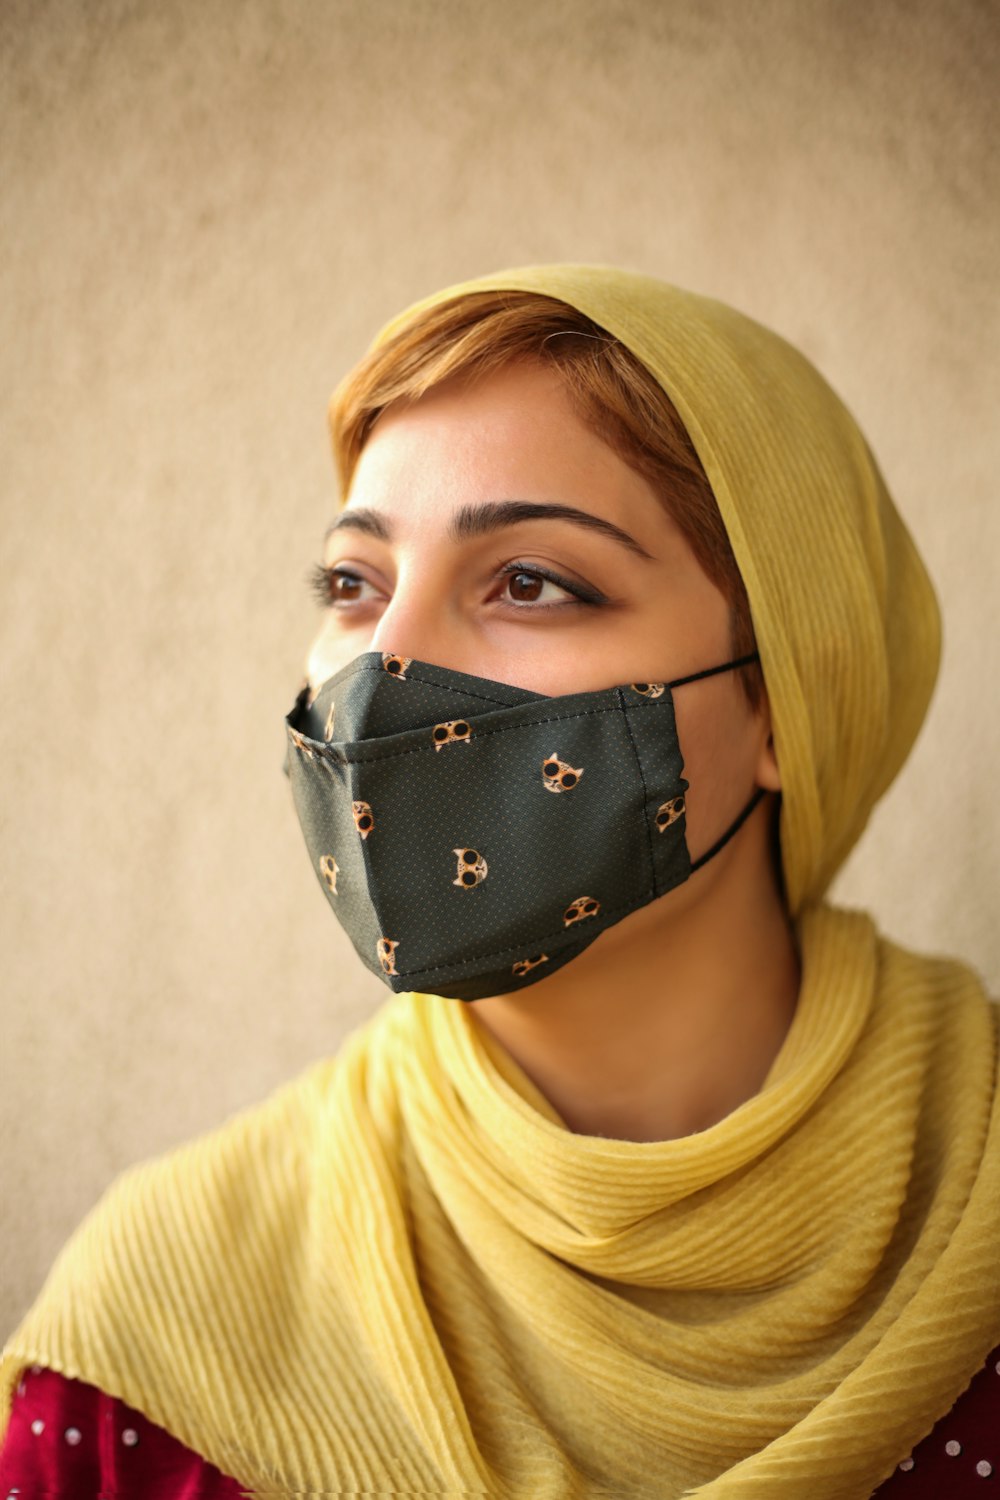 woman in yellow turtleneck sweater wearing black and white mask